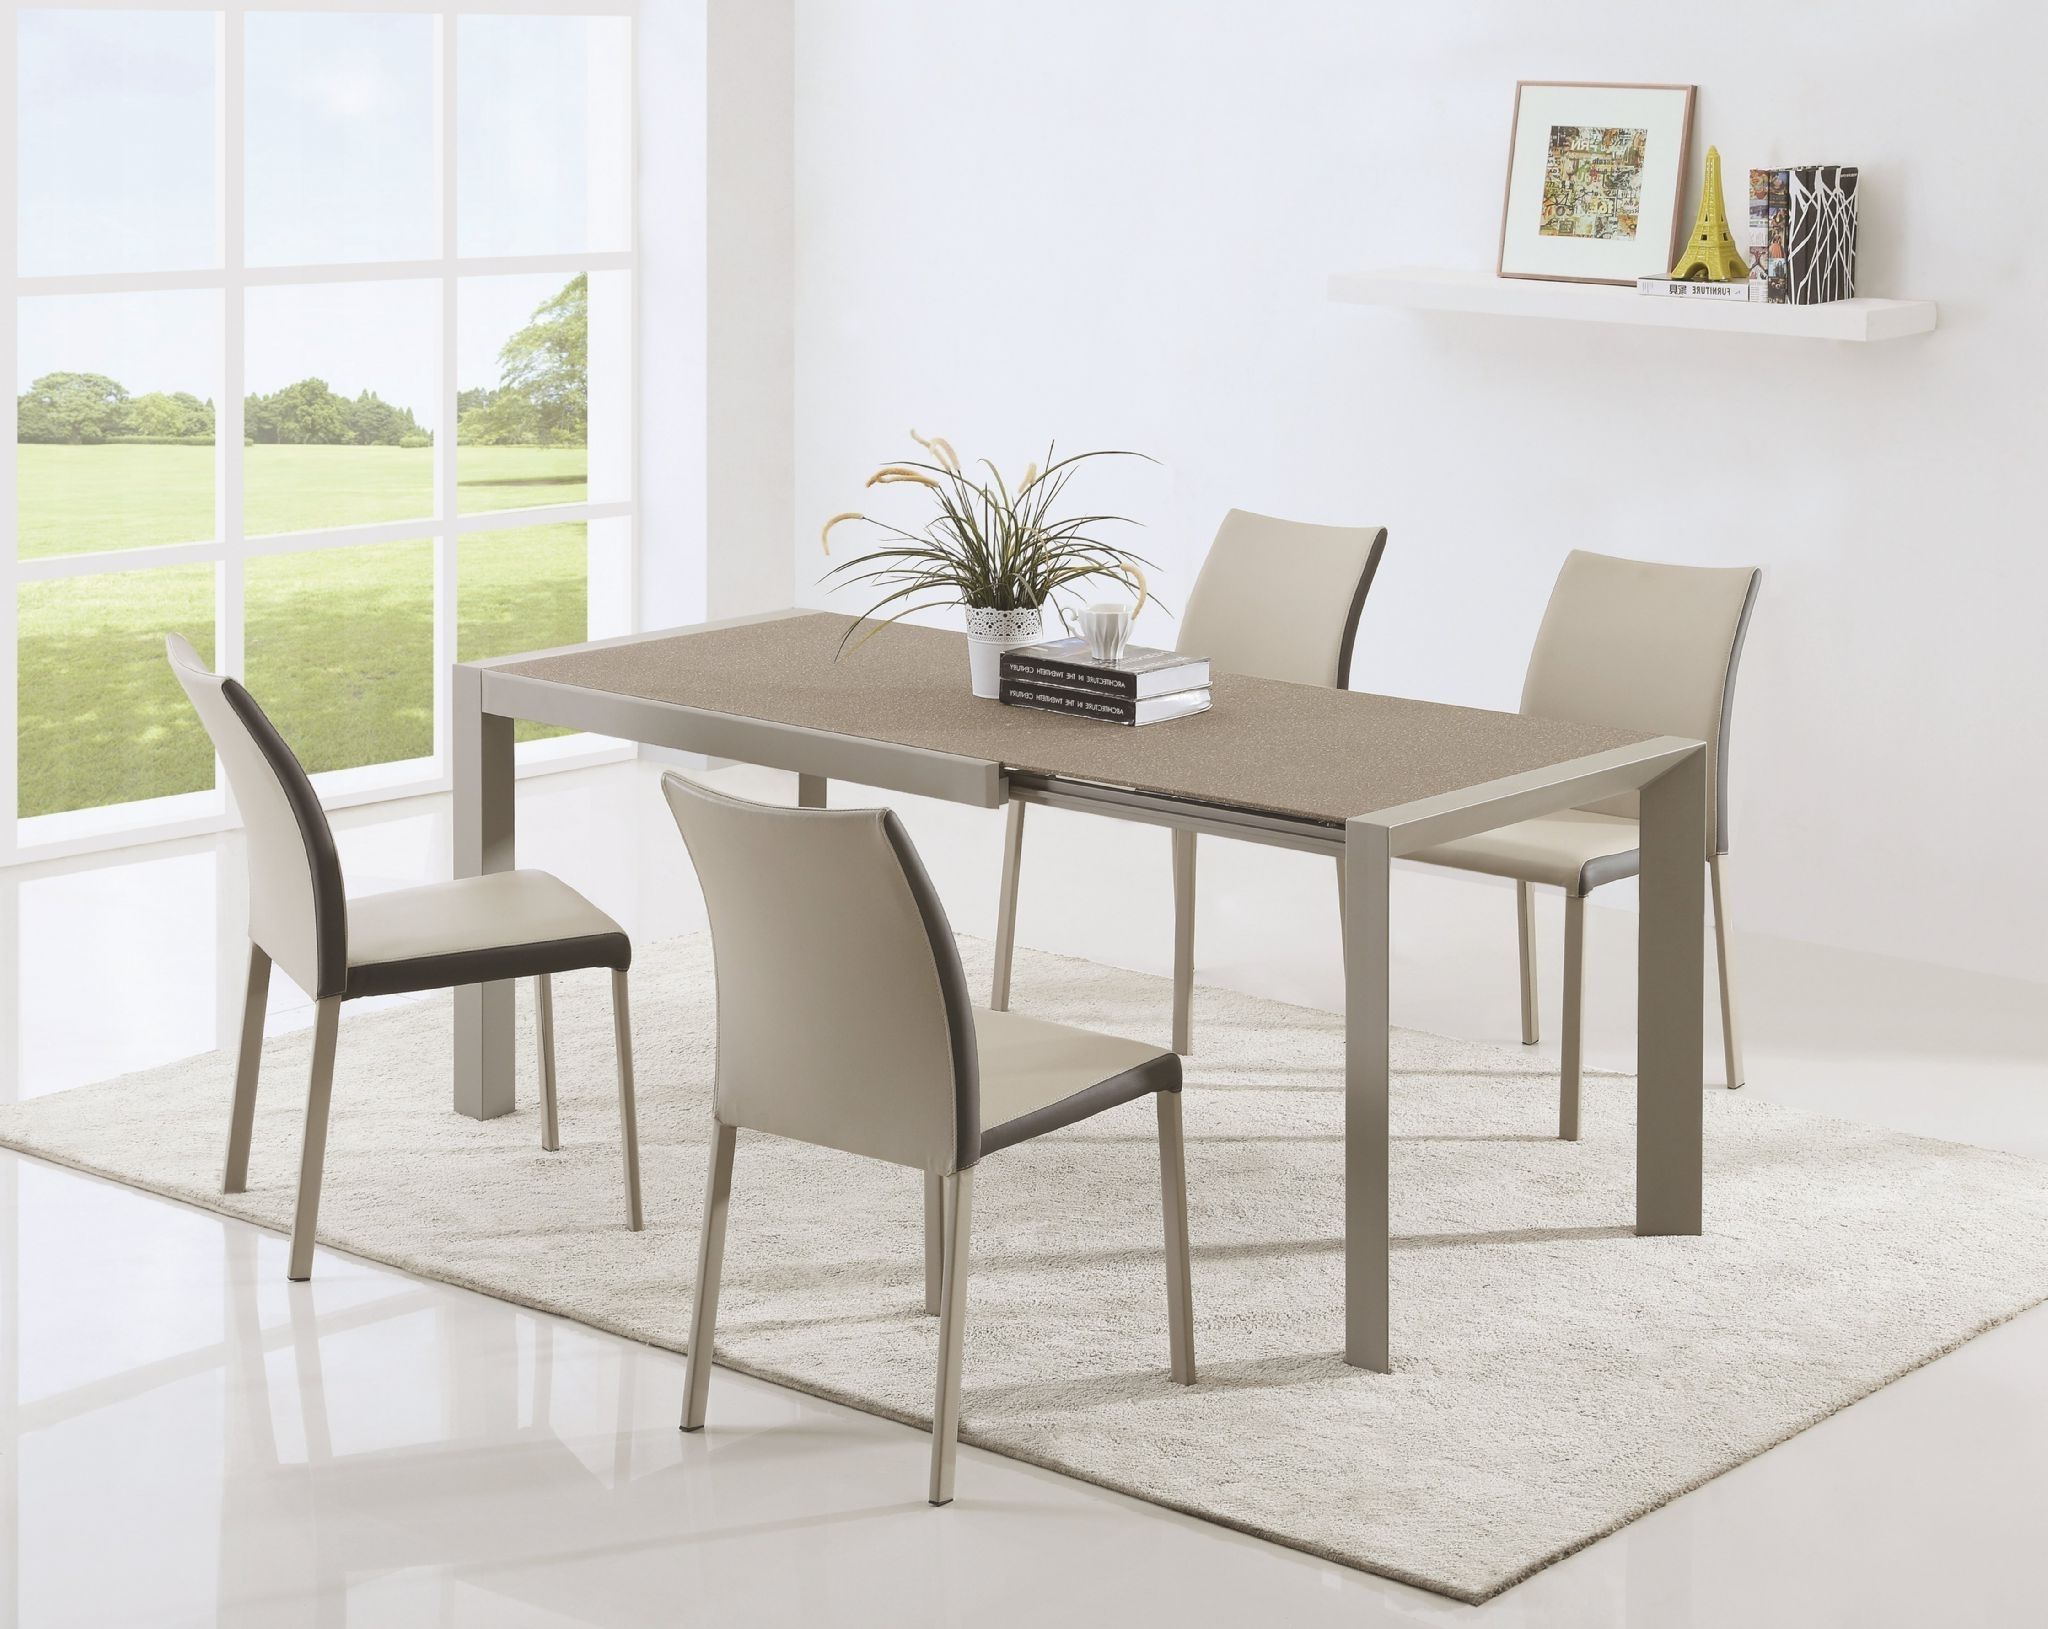 2017 Cassidy Beige Extending Dining Table With Stone Effect Top Pertaining To Glass Extending Dining Tables (View 7 of 25)